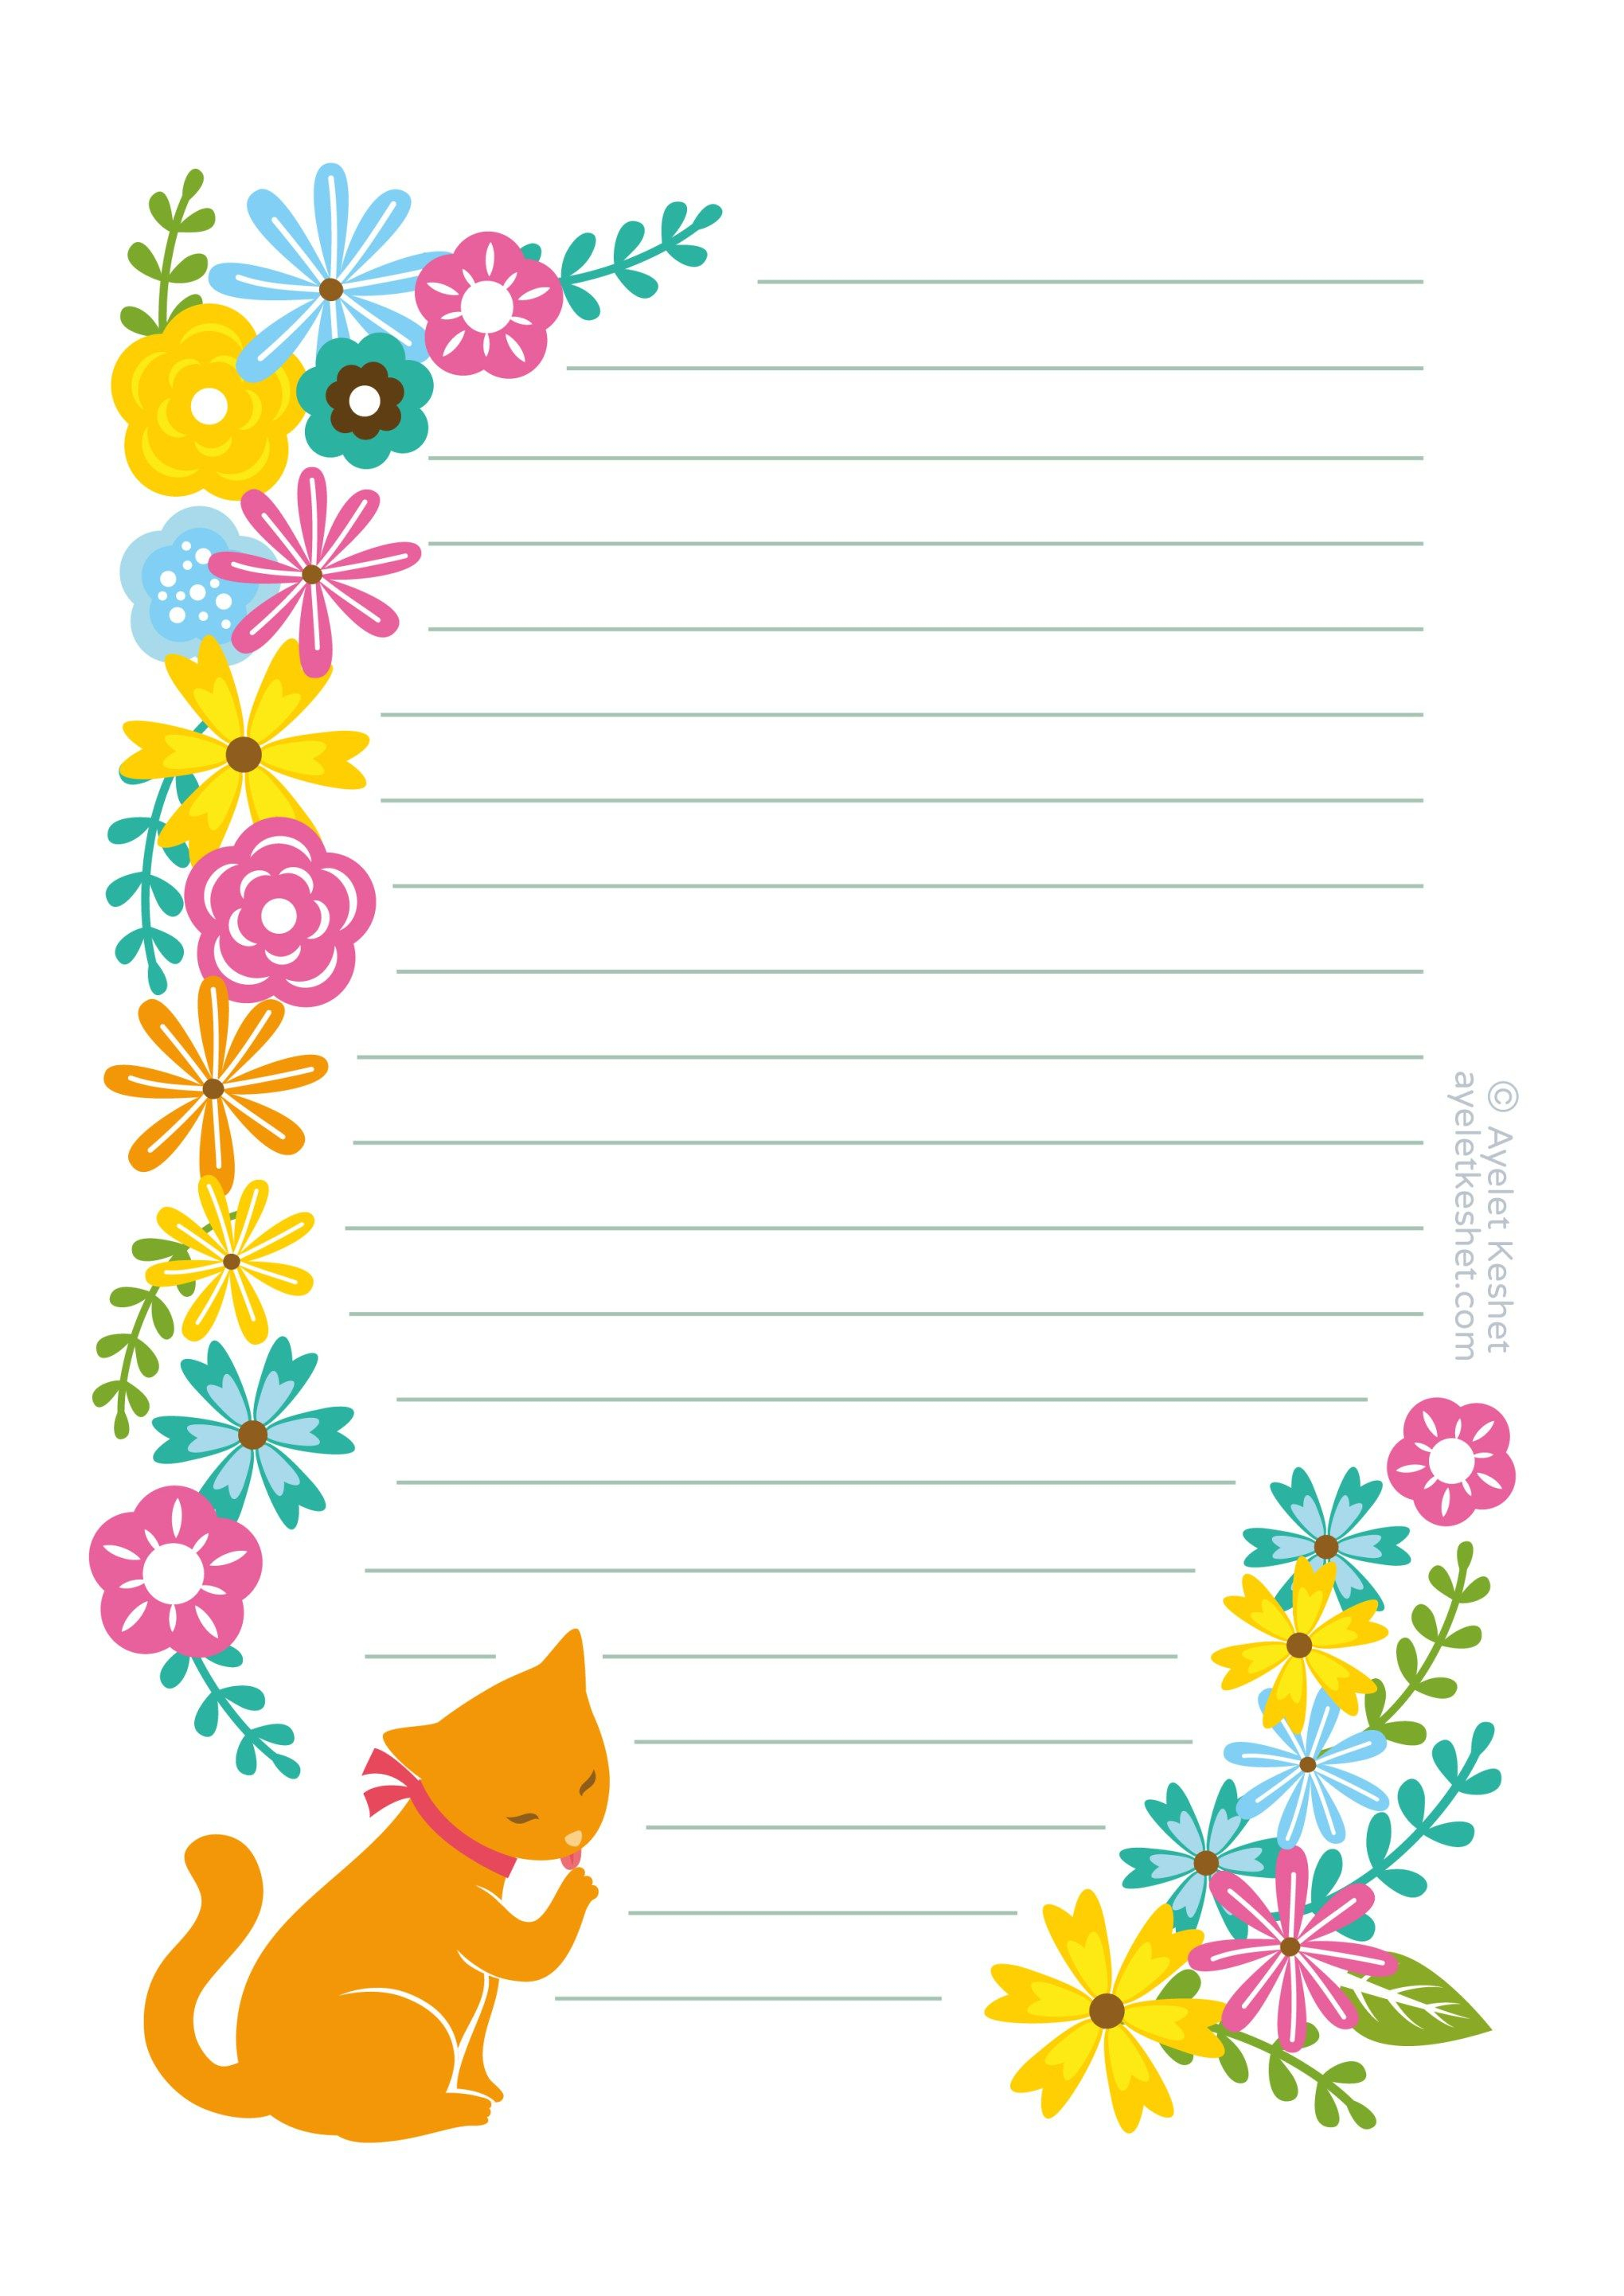 Free Printable Letter Paper | Printables To Go | Pinterest - Free Printable Stationery Paper